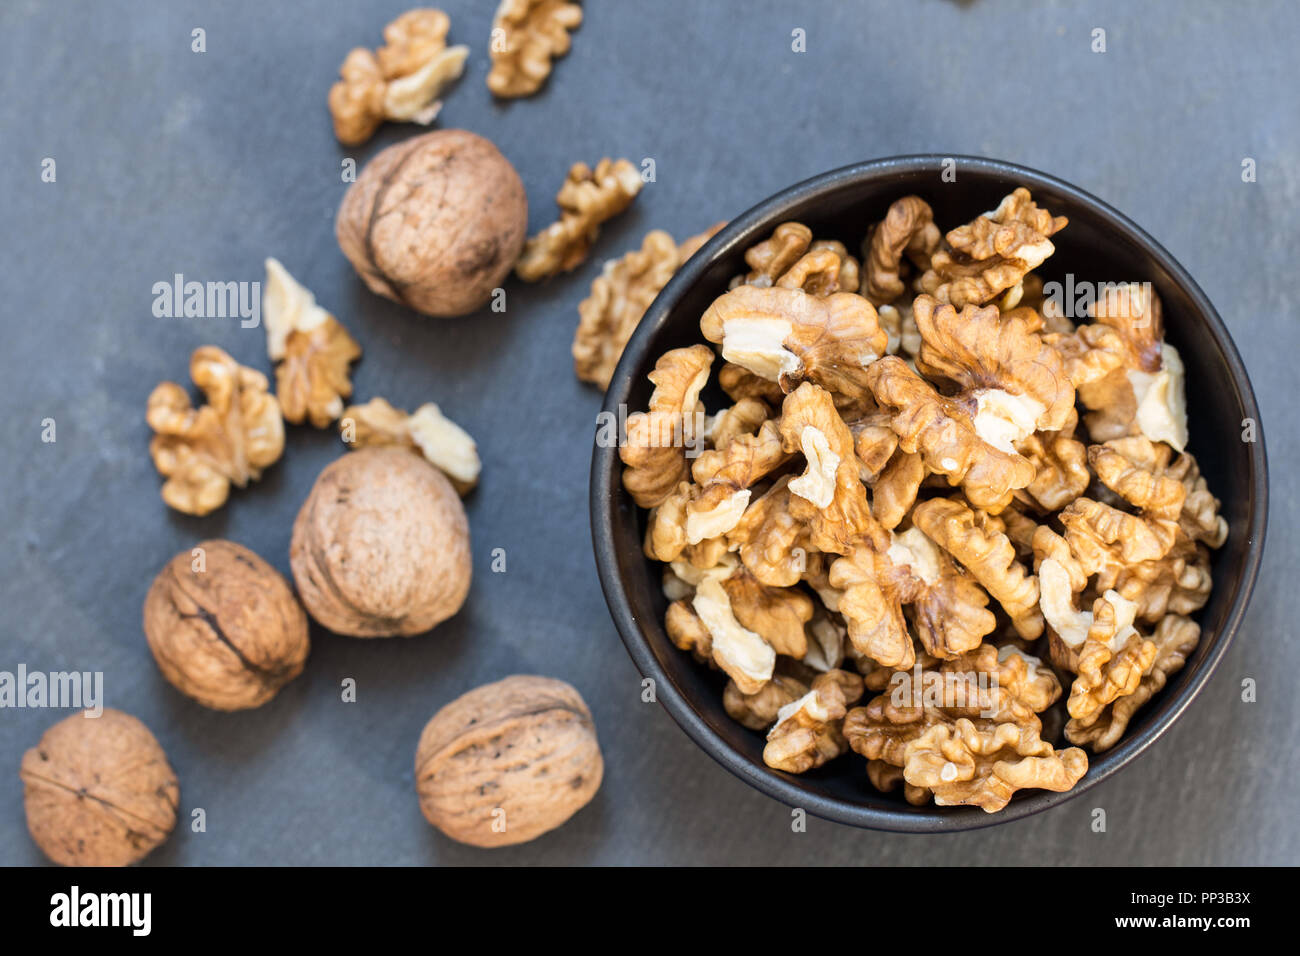 peeled and whole walnuts table top view Stock Photo